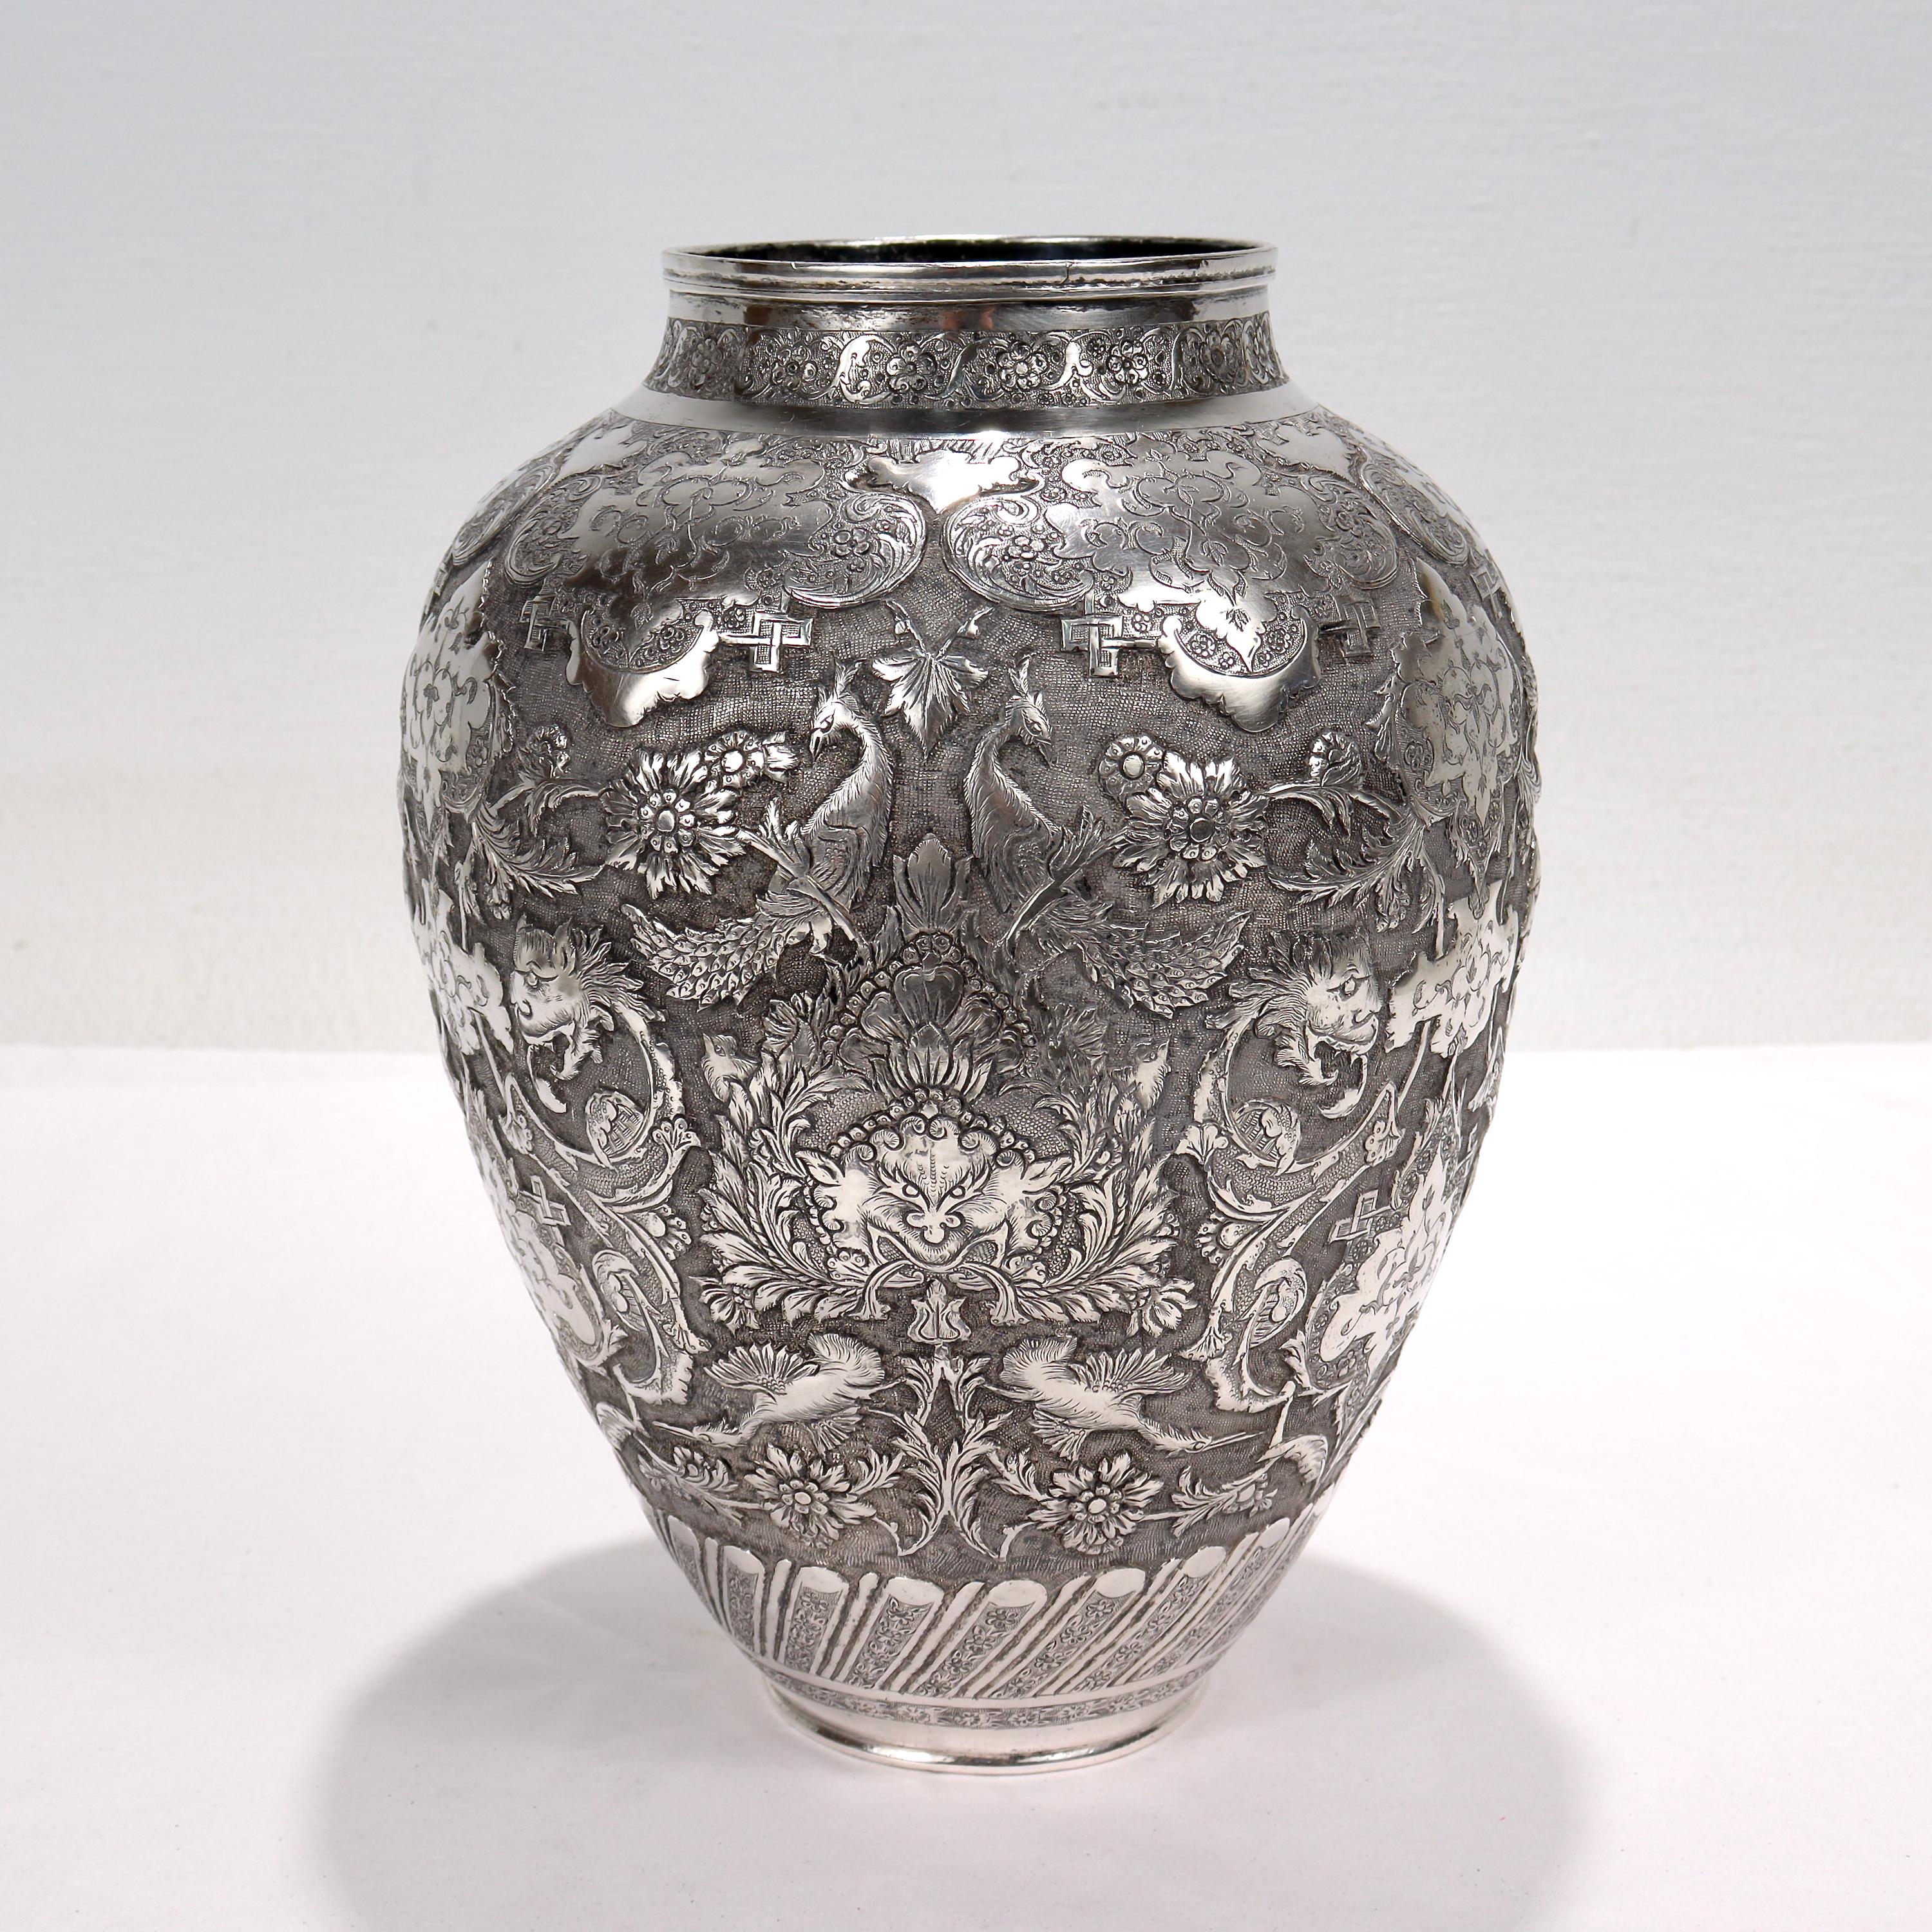 A fine Islamic silver vase.

Richly decorated with Ishafan (Eshafan) style repousse decoration throughout including gryphon heads, flowers & vines, birds of paradise, foliage, and Arabesque geometric decoration throughout. 

Signed to the base with